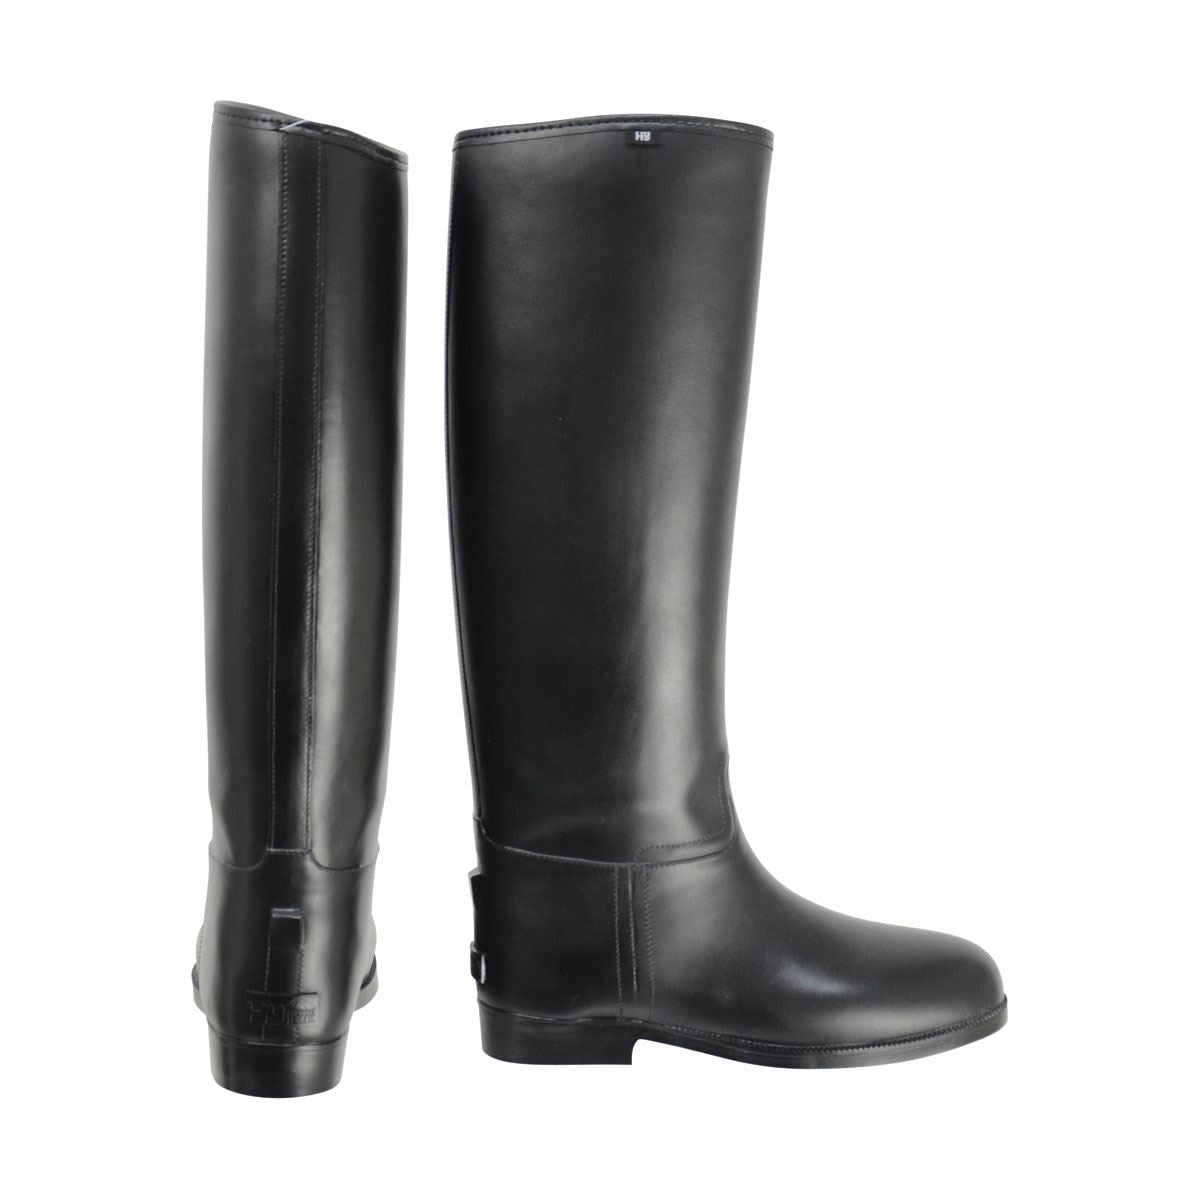 HyLAND Childrens Long Greenland Waterproof Riding Boots - Just Horse Riders